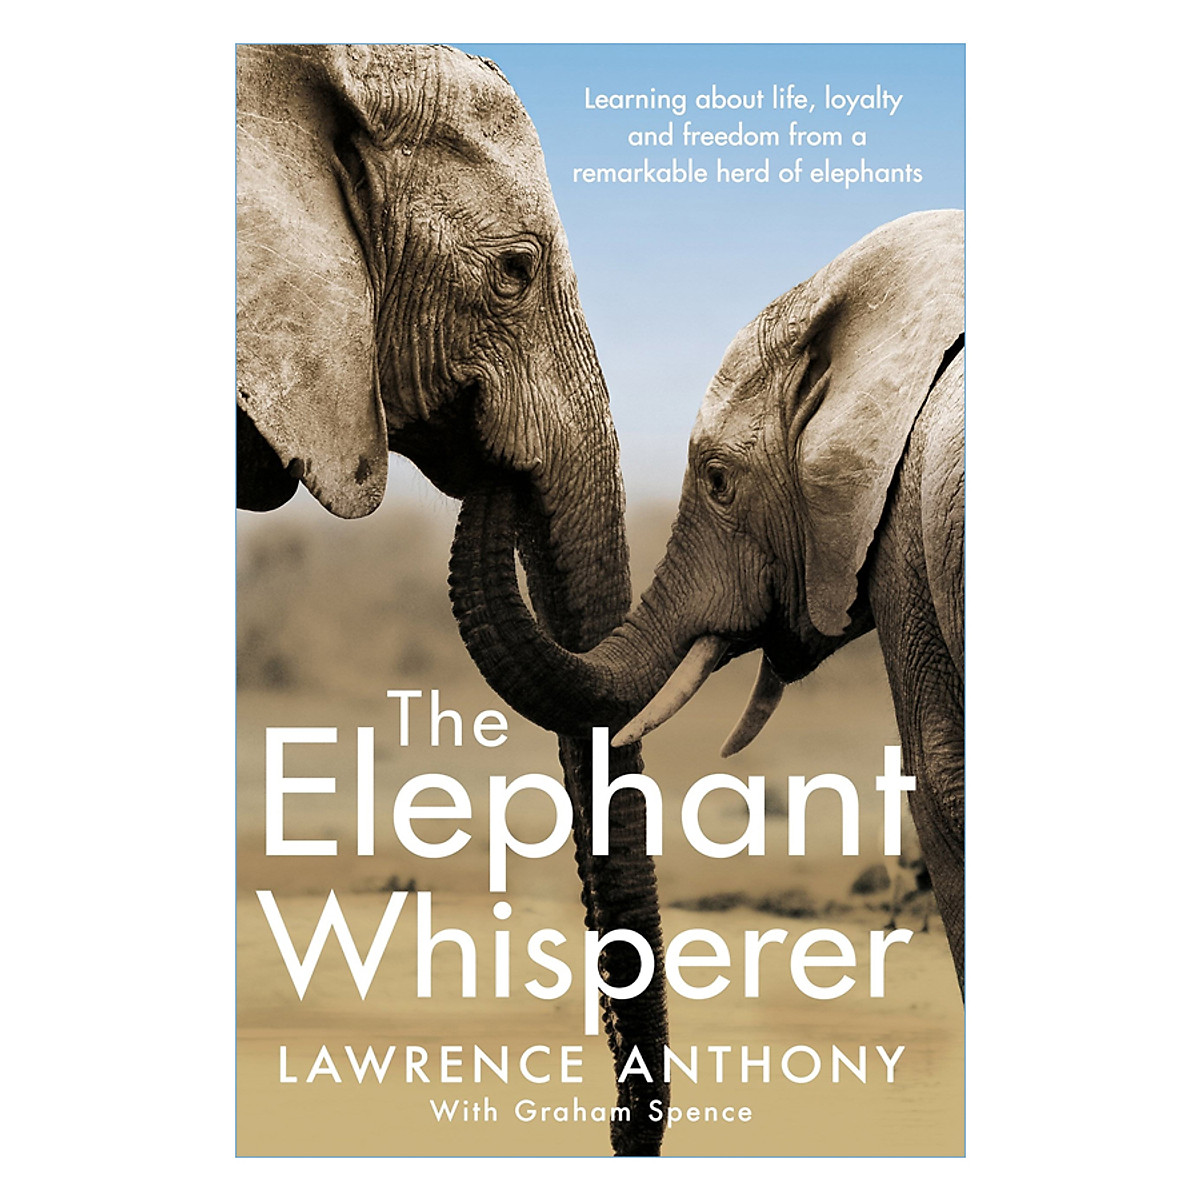 The Elephant Whisperer: Learning About Life, Loyalty and Freedom From a Remarkable Herd of Elephants (Paperback)